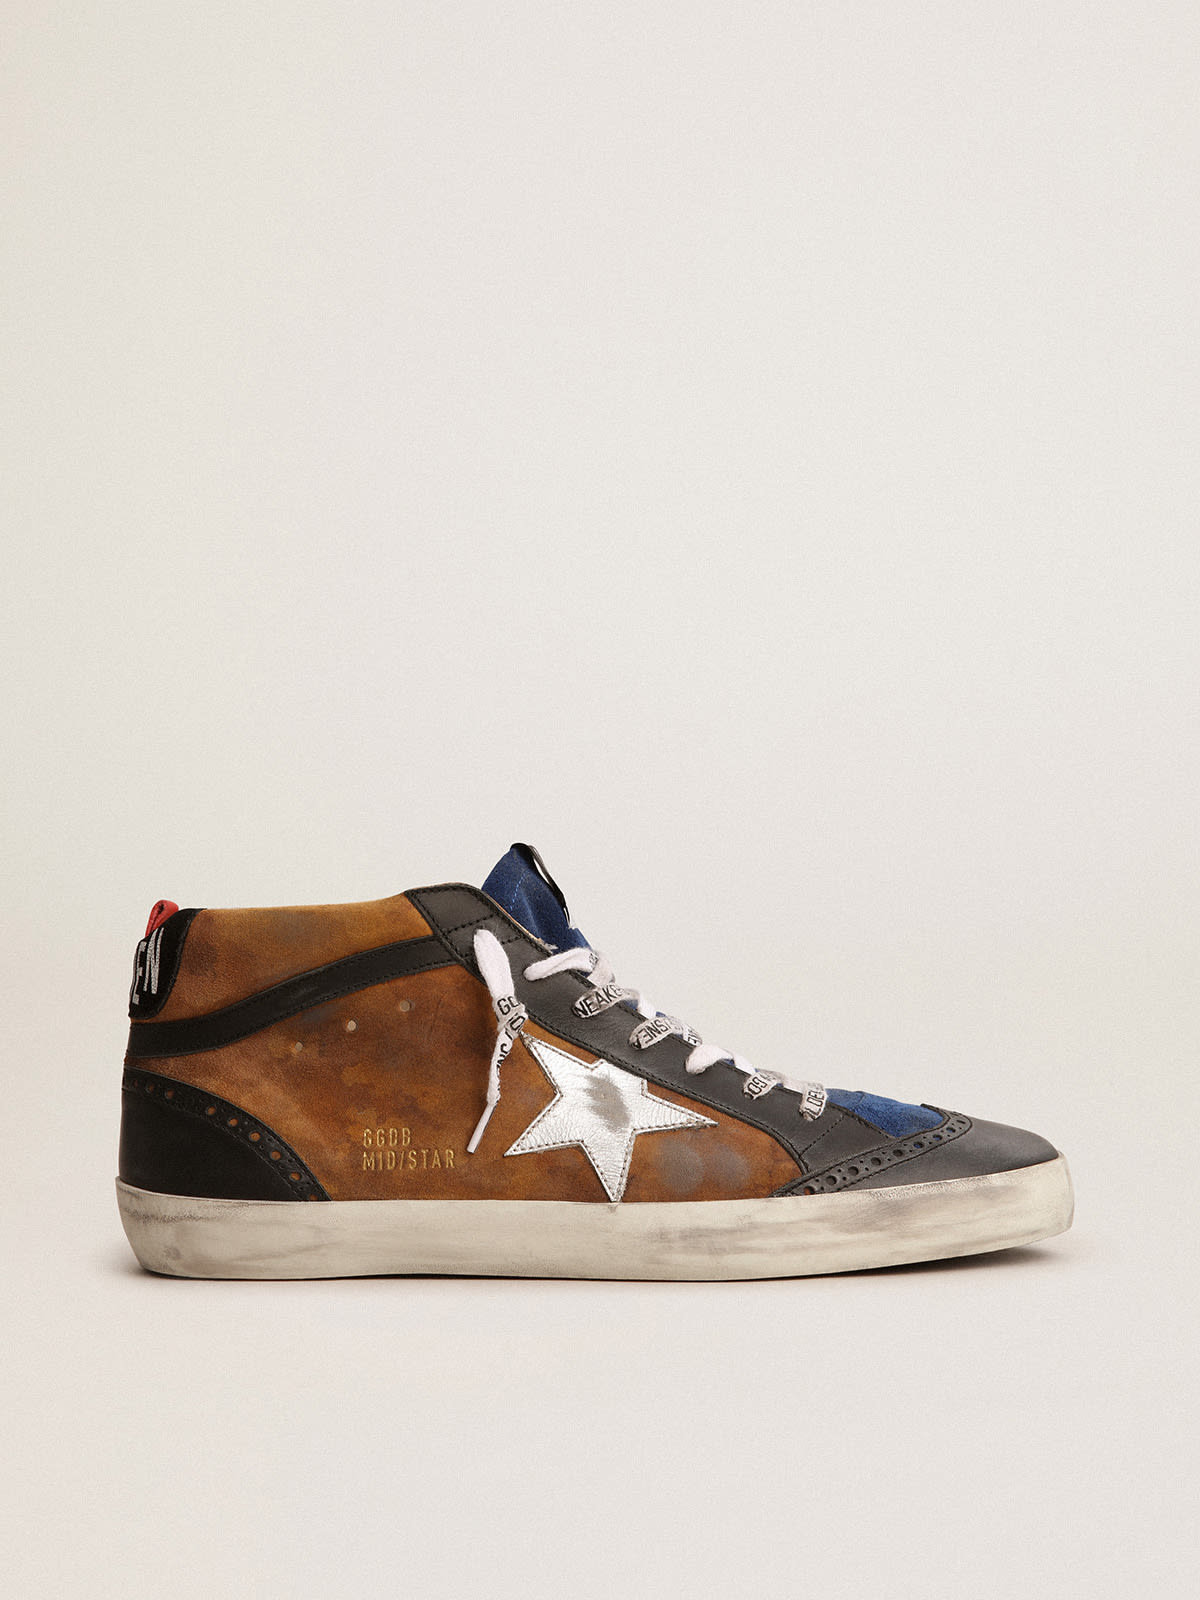 Mid Star sneakers in bronze-colored suede with black leather details |  Golden Goose